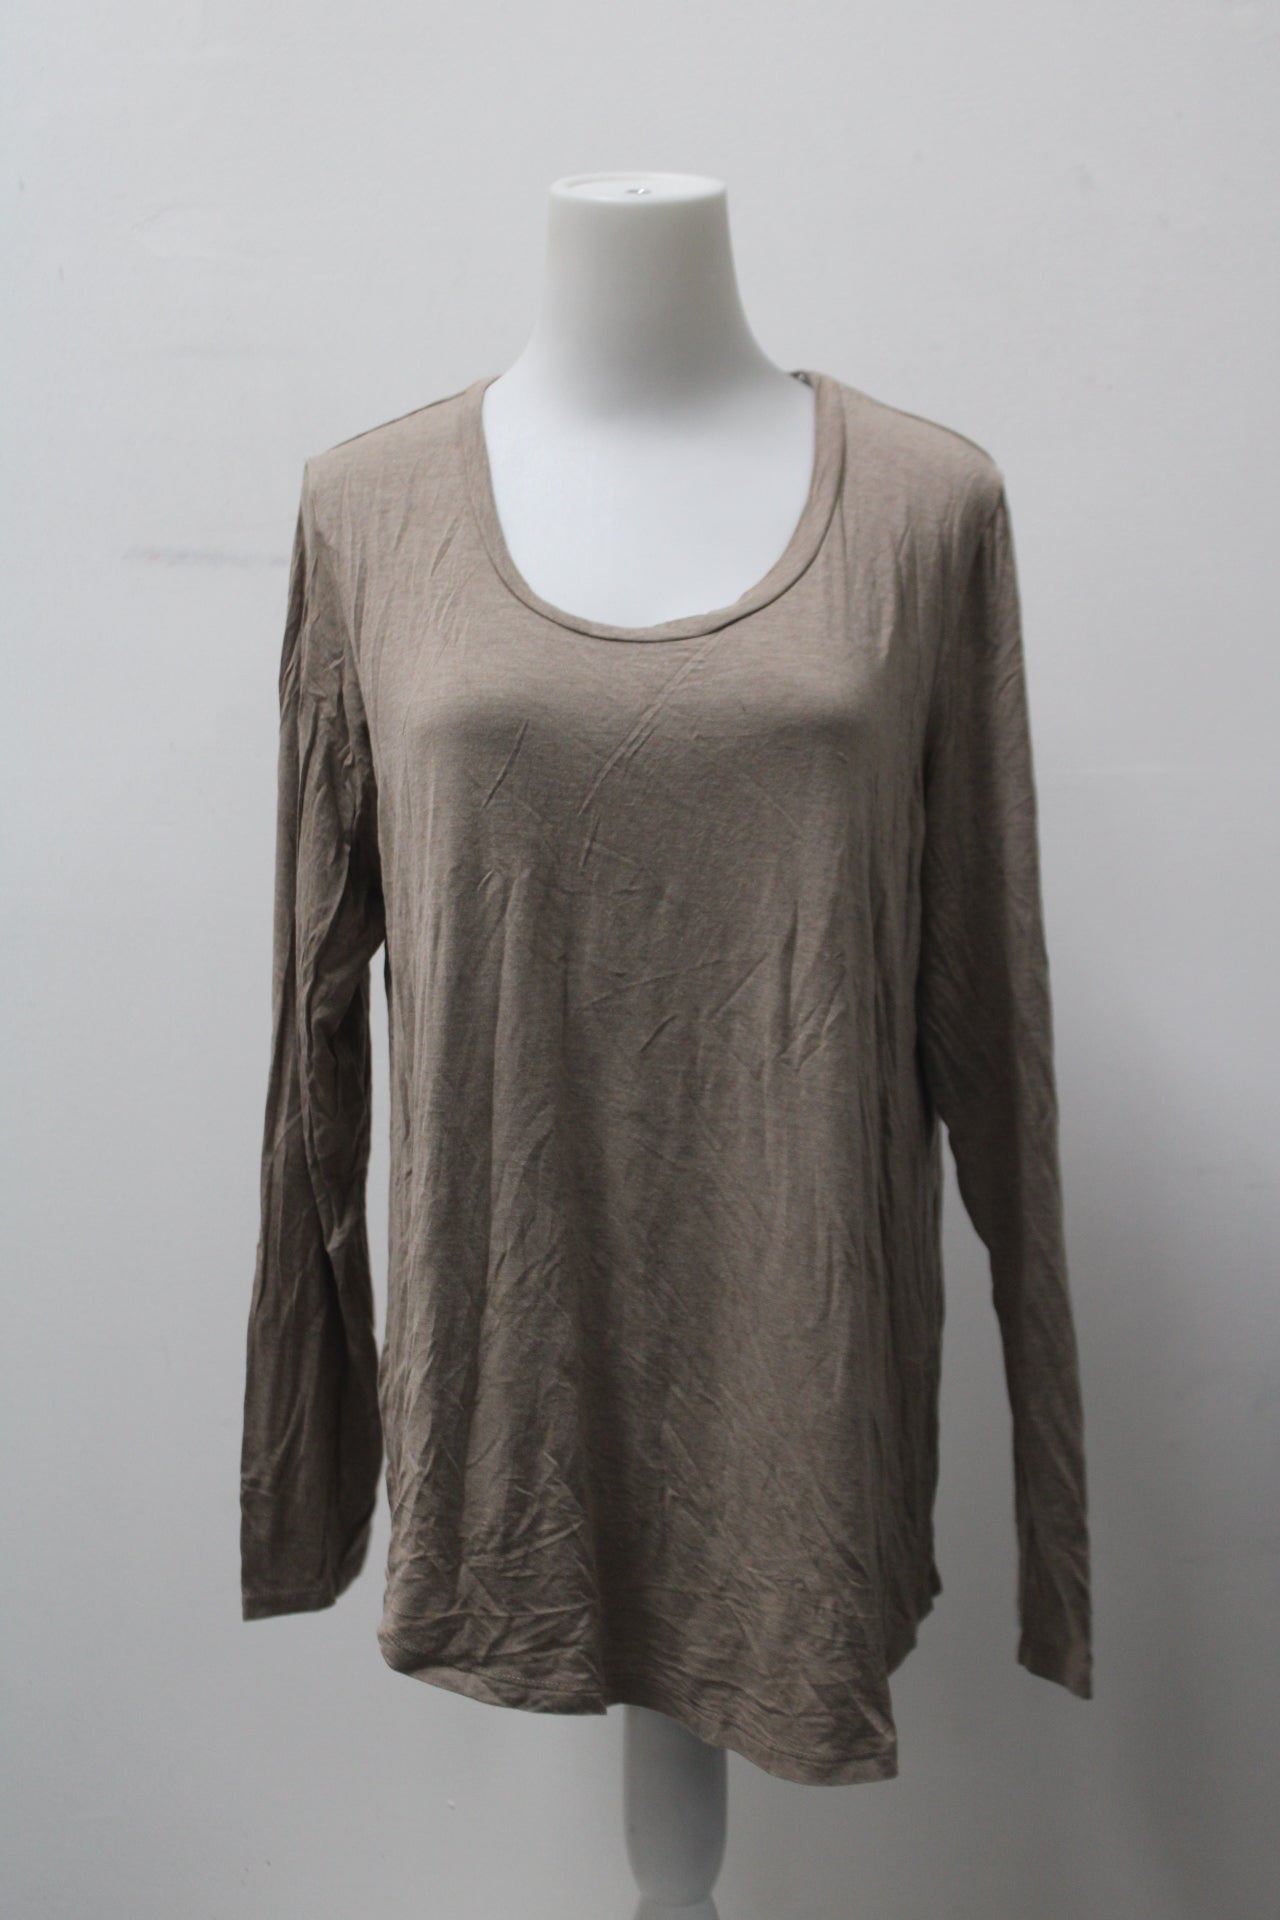 Kindred Bravely Women's Top Brown M Pre-Owned - AbuMaizar Dental Roots  Clinic